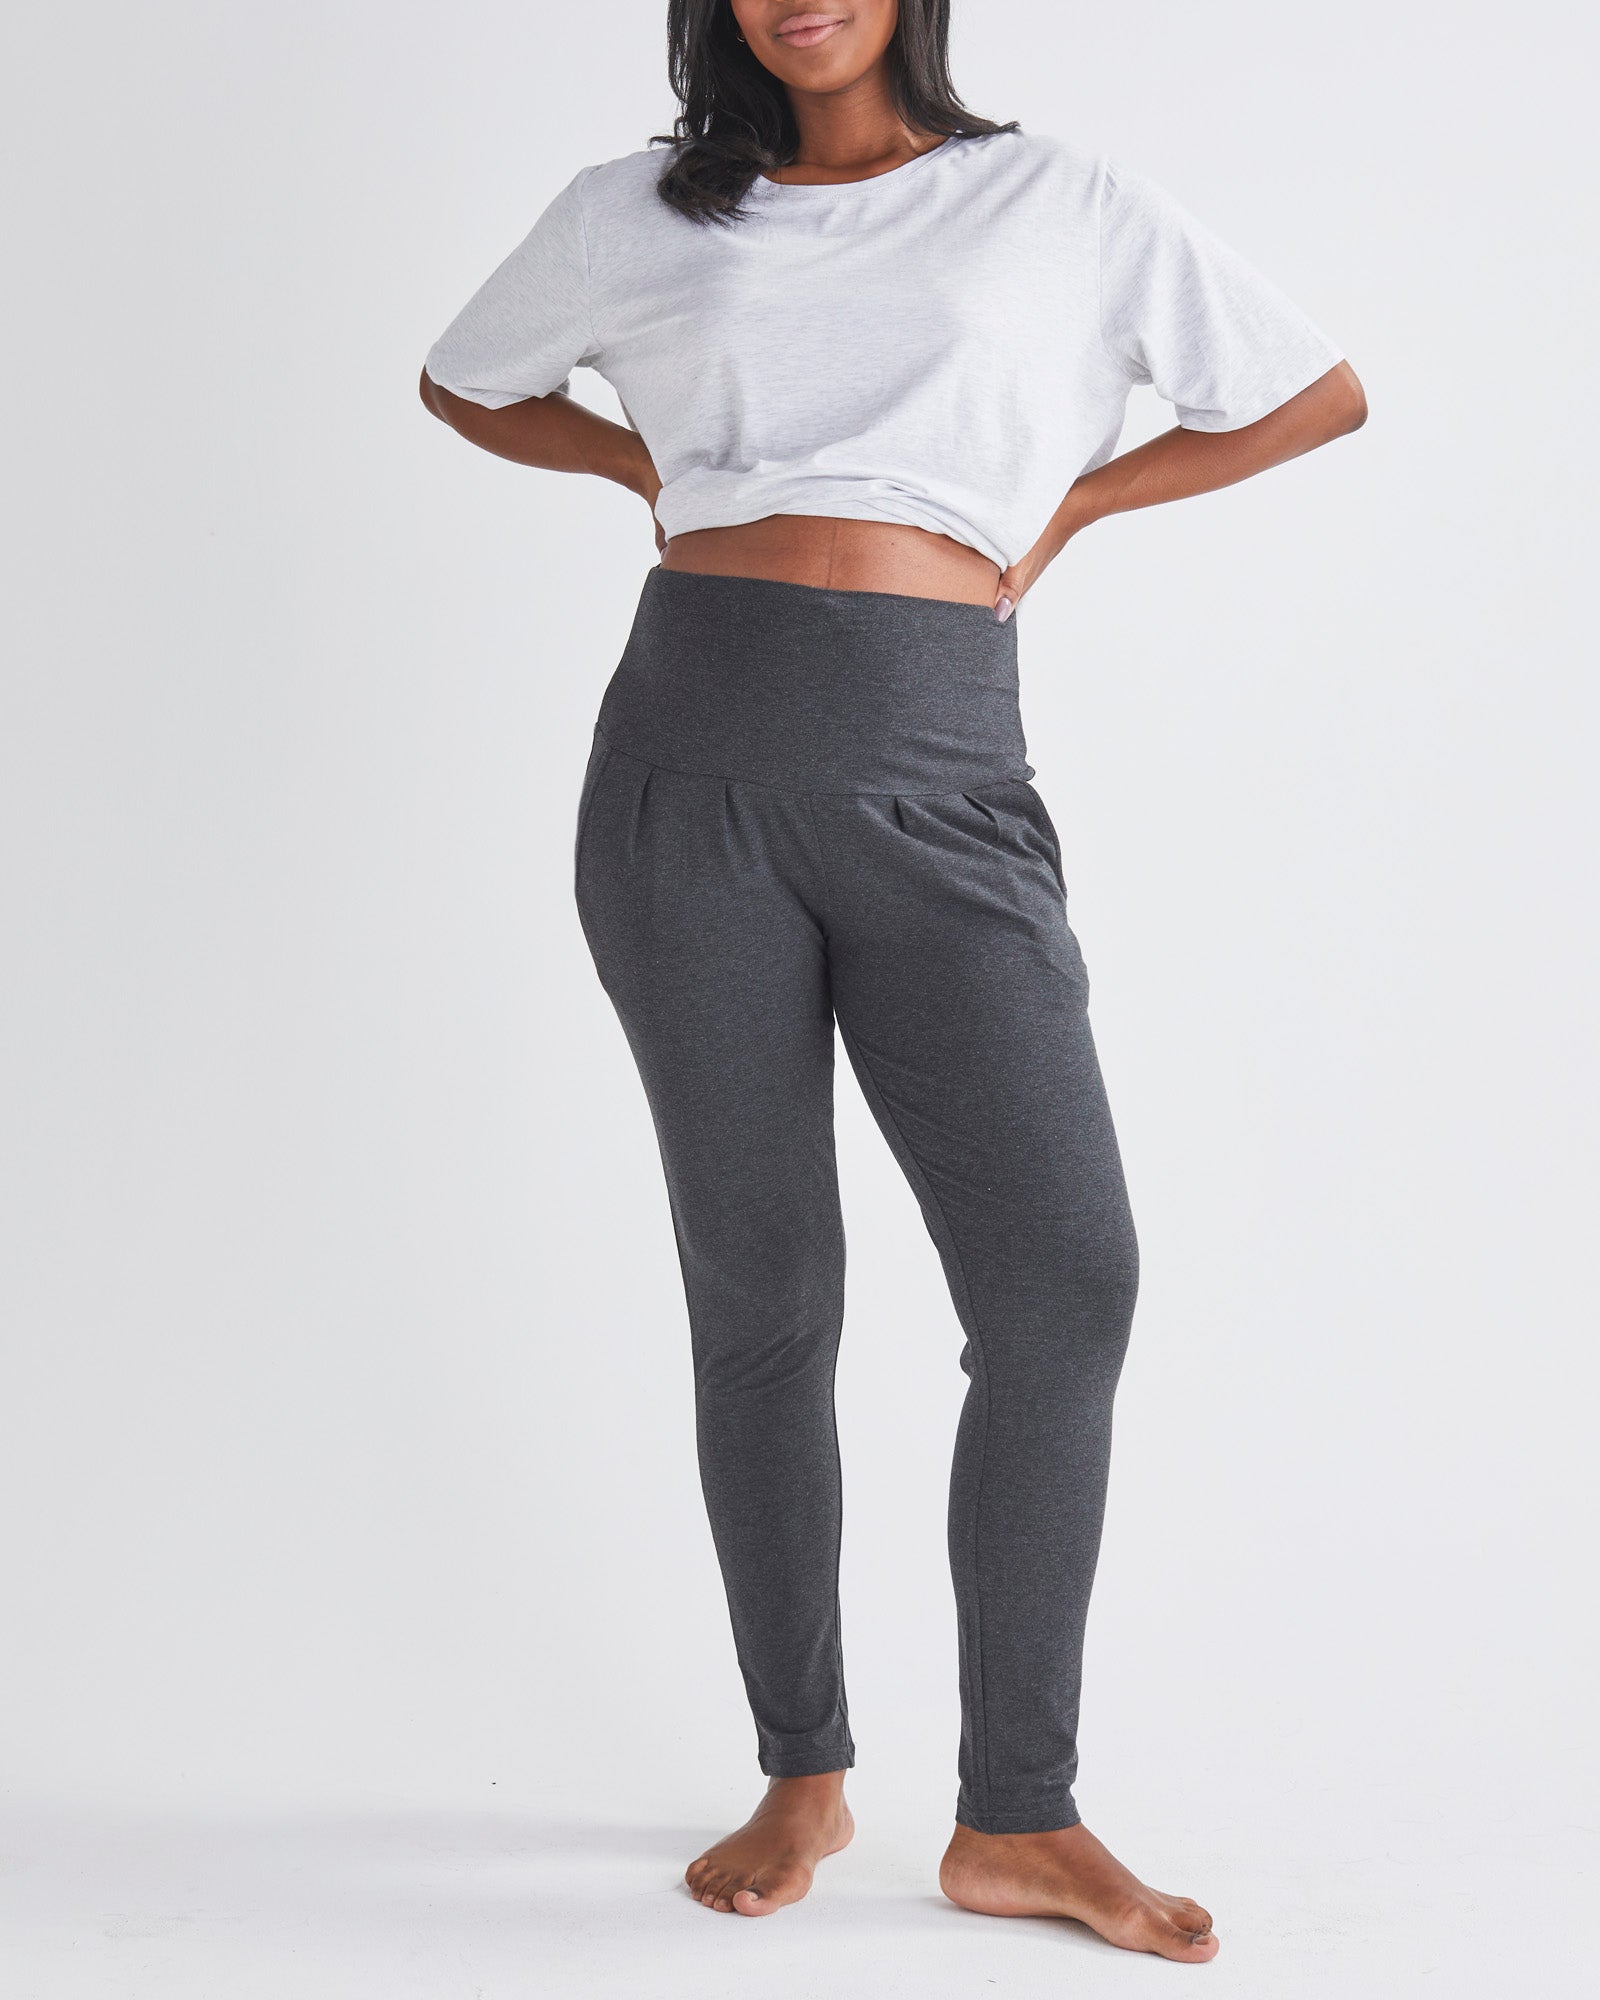 Eden Ultra Soft Maternity Lounge Pants in Charcoal